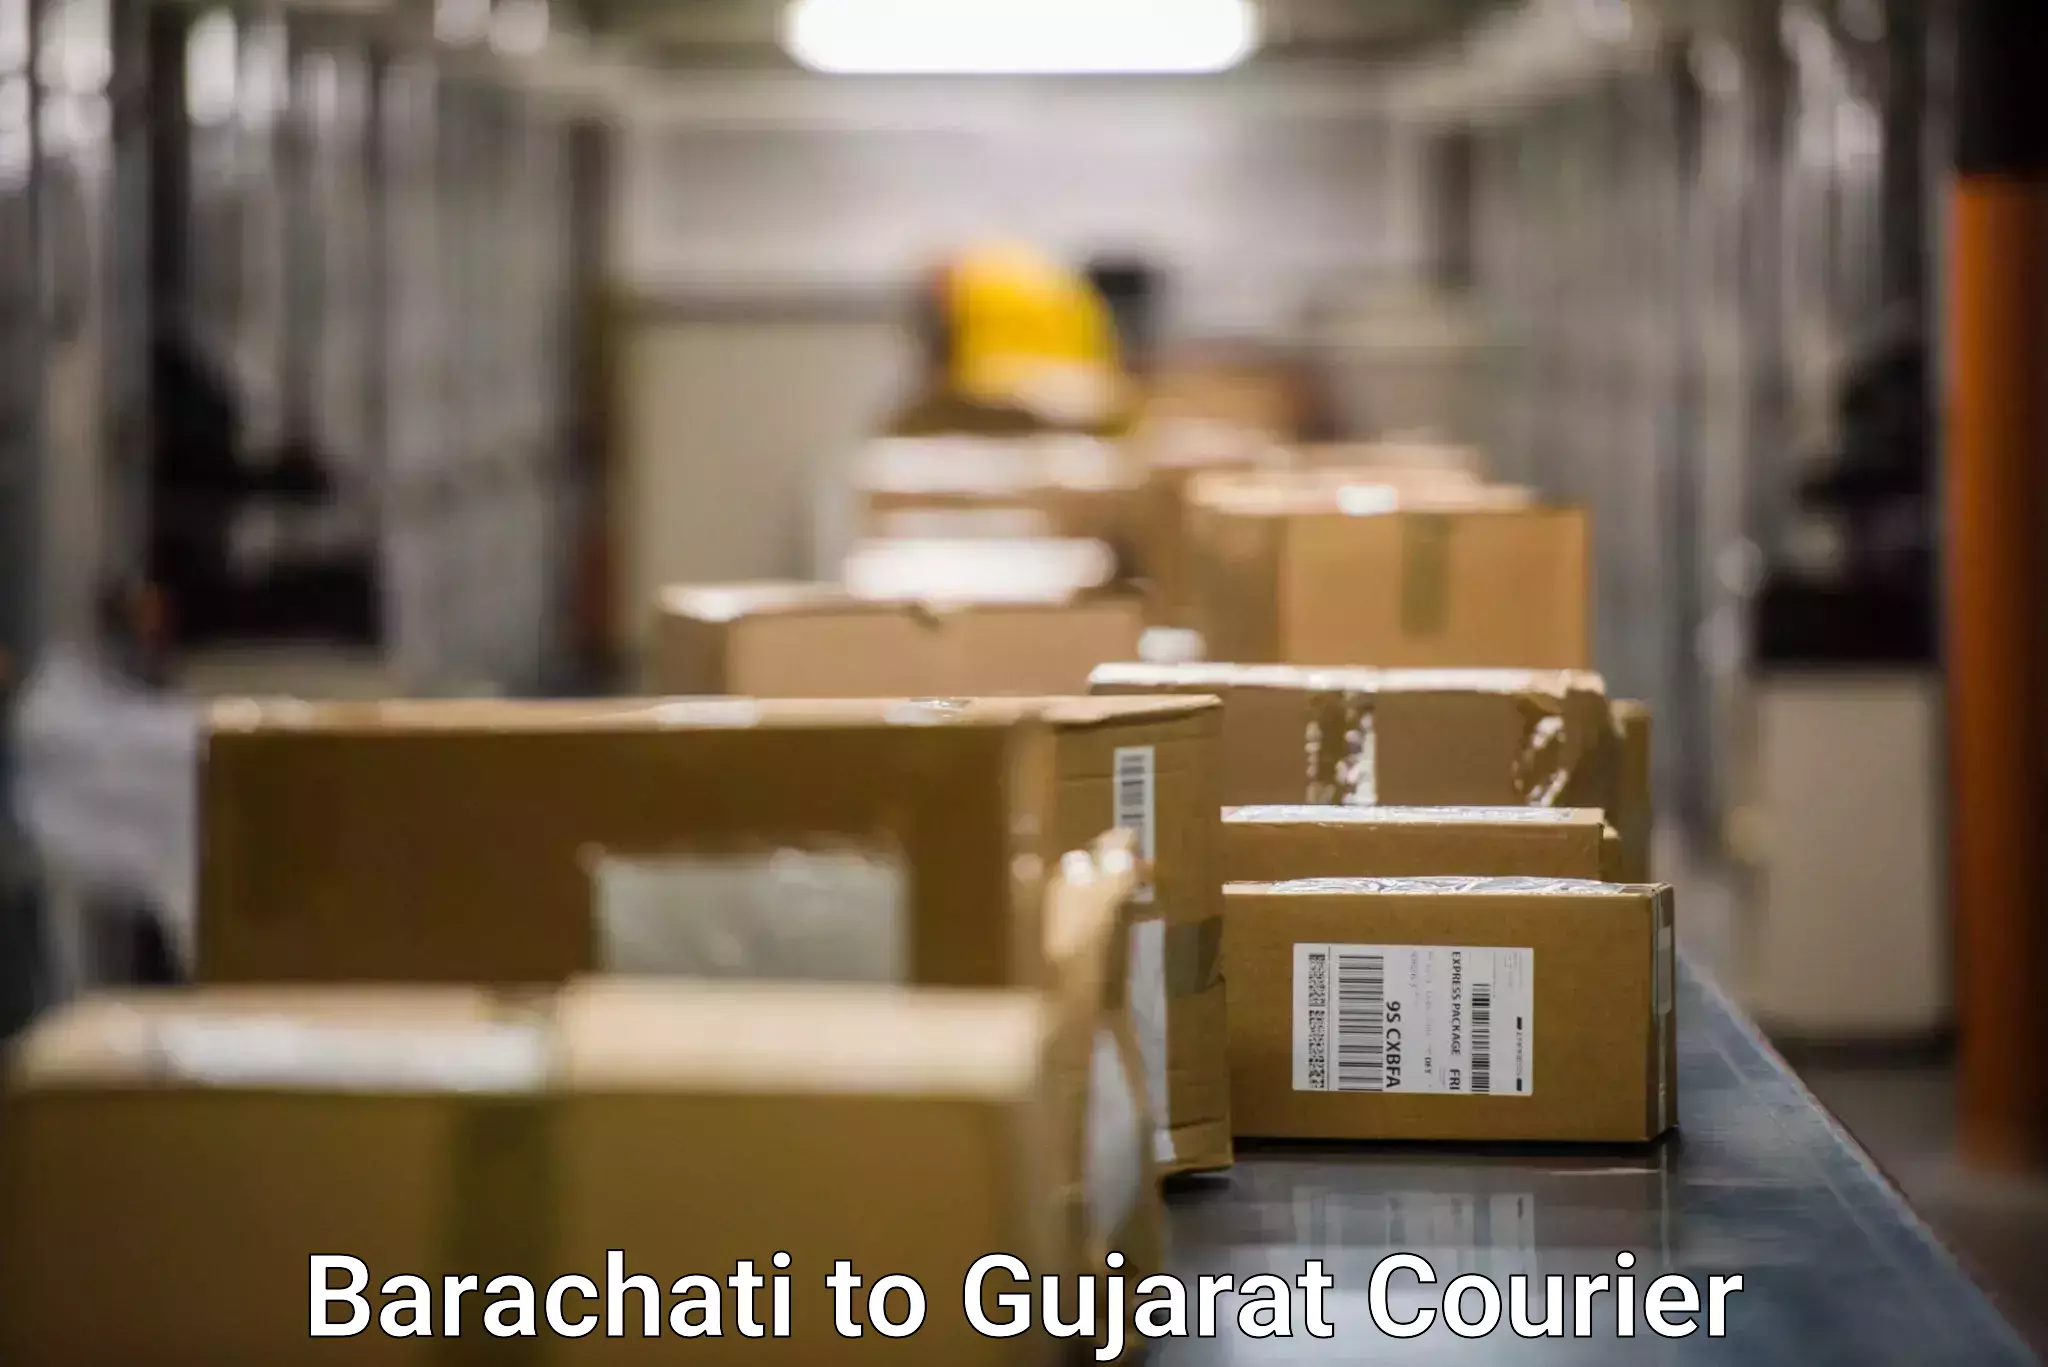 State-of-the-art courier technology Barachati to Gujarat